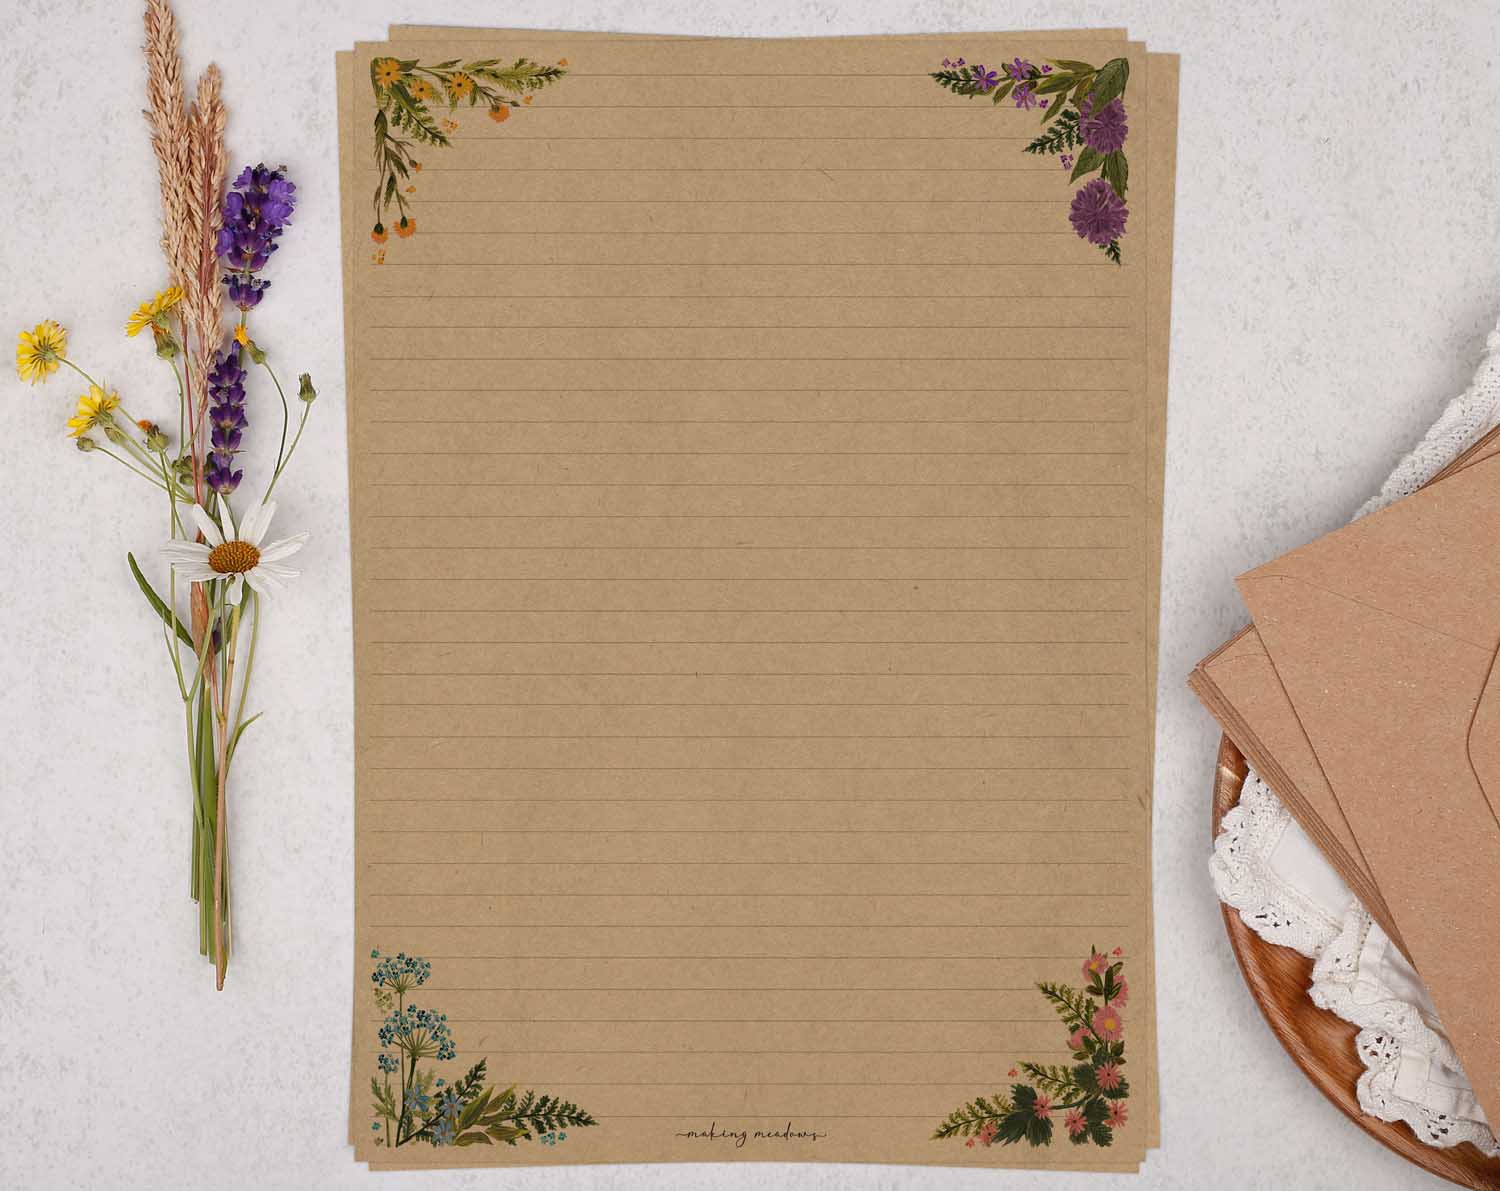 A4 Kraft Letter Writing Paper Sheets with a Watercolour Wild Flower Corner design. 